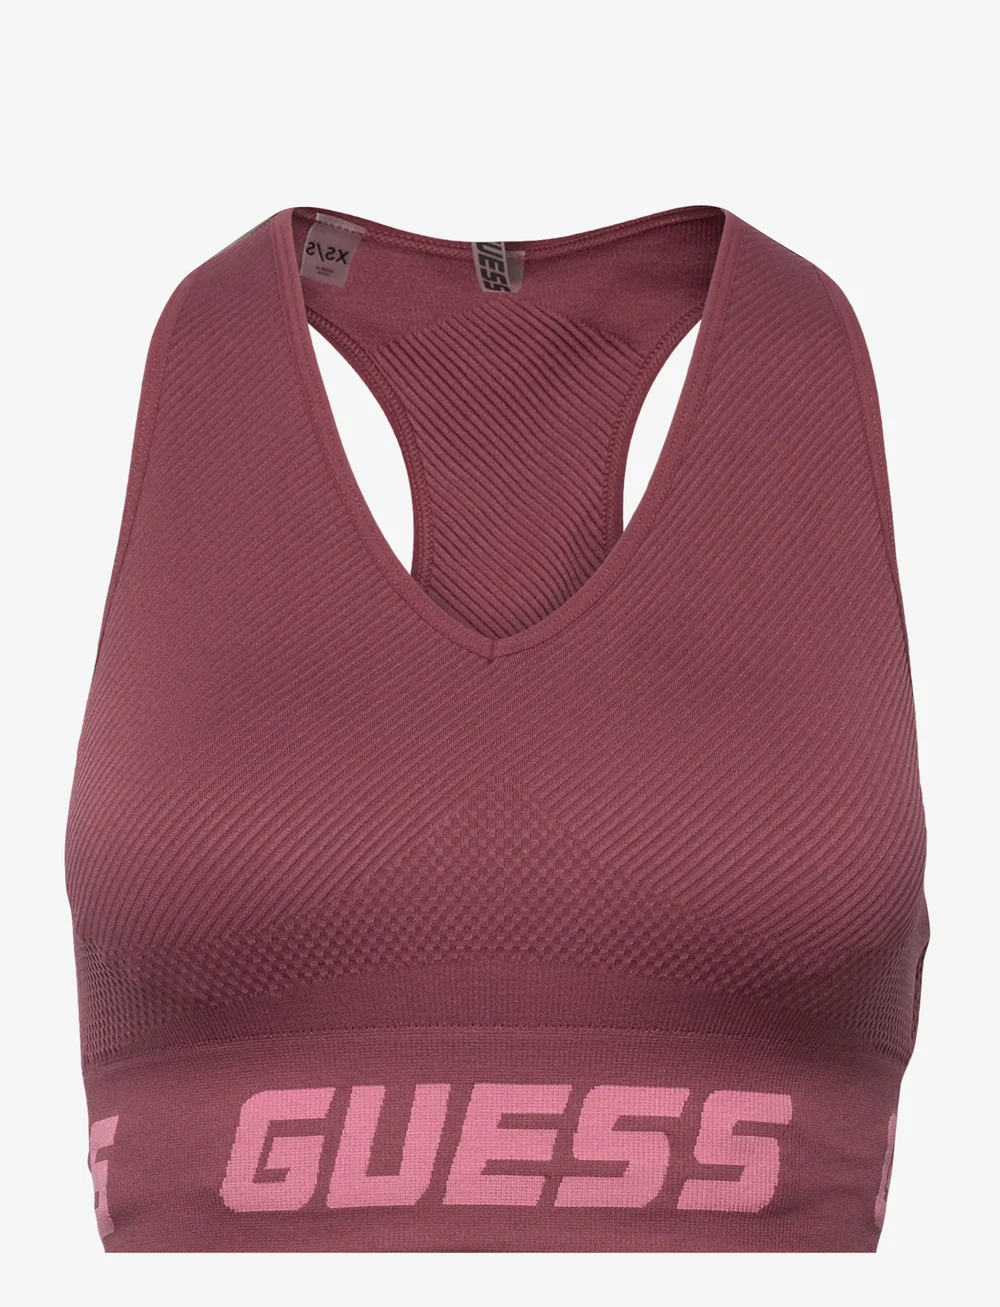 Guess Activewear Trudy Seamless Active Top - Sports bras 